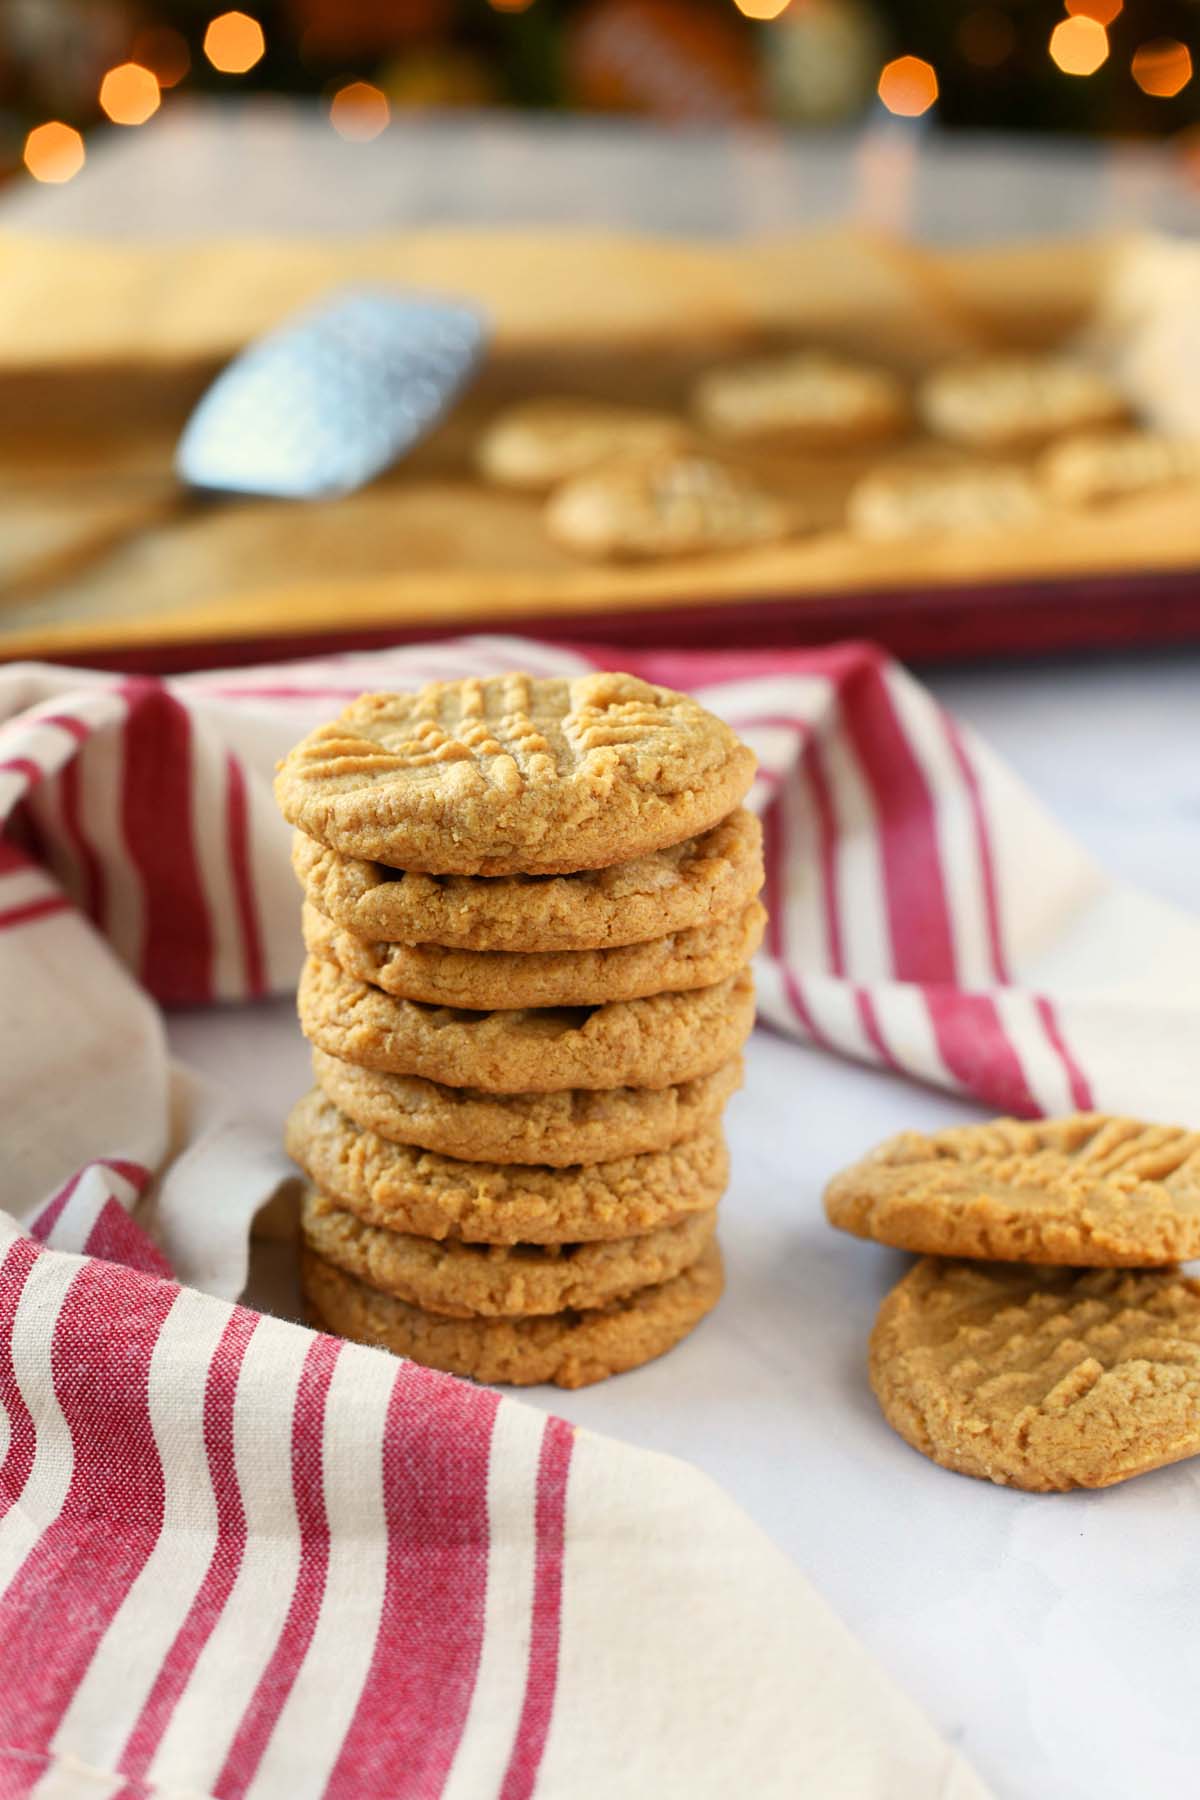 A stack of 3 ingredient peanut butter cookies near a red, striped napkin.